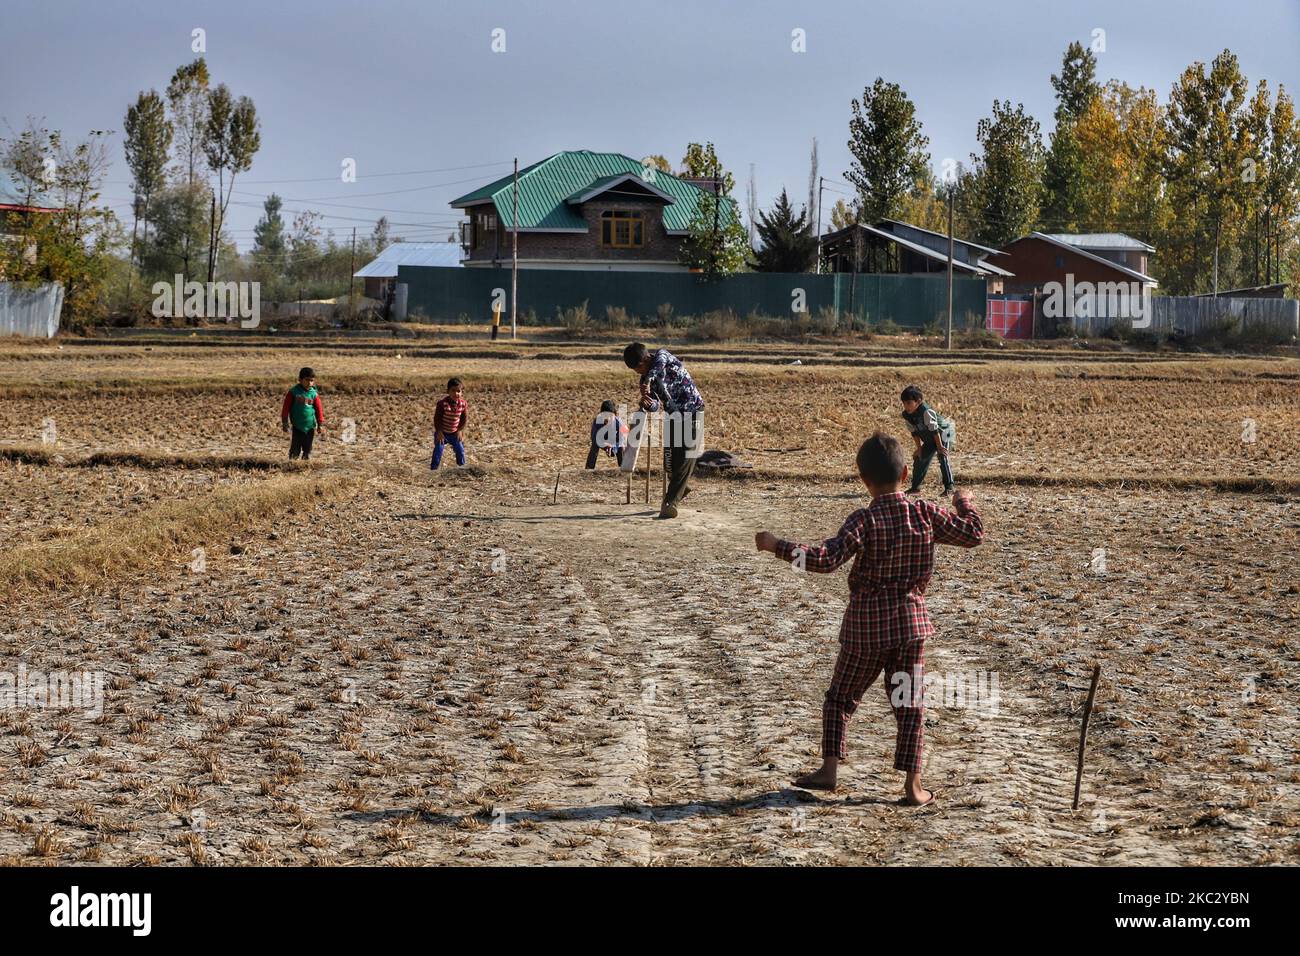 Kashmiri kids playing Cricket in agriculture Land (Paddy Fields) in the outskirts of Sopore Town in District Baramulla, jammu and Kashmir, India on 30 October 2020. As the anger grows in Jammu and Kashmir over the new land laws, which allow any Indian citizen to buy land in the Union territory, the separatist Hurriyat Conference on Wednesday broke its silence and called for a one-day shutdown on October 31 to protest the â€œanti-people movesâ€ by New Delhi. (Photo by Nasir Kachroo/NurPhoto) Stock Photo